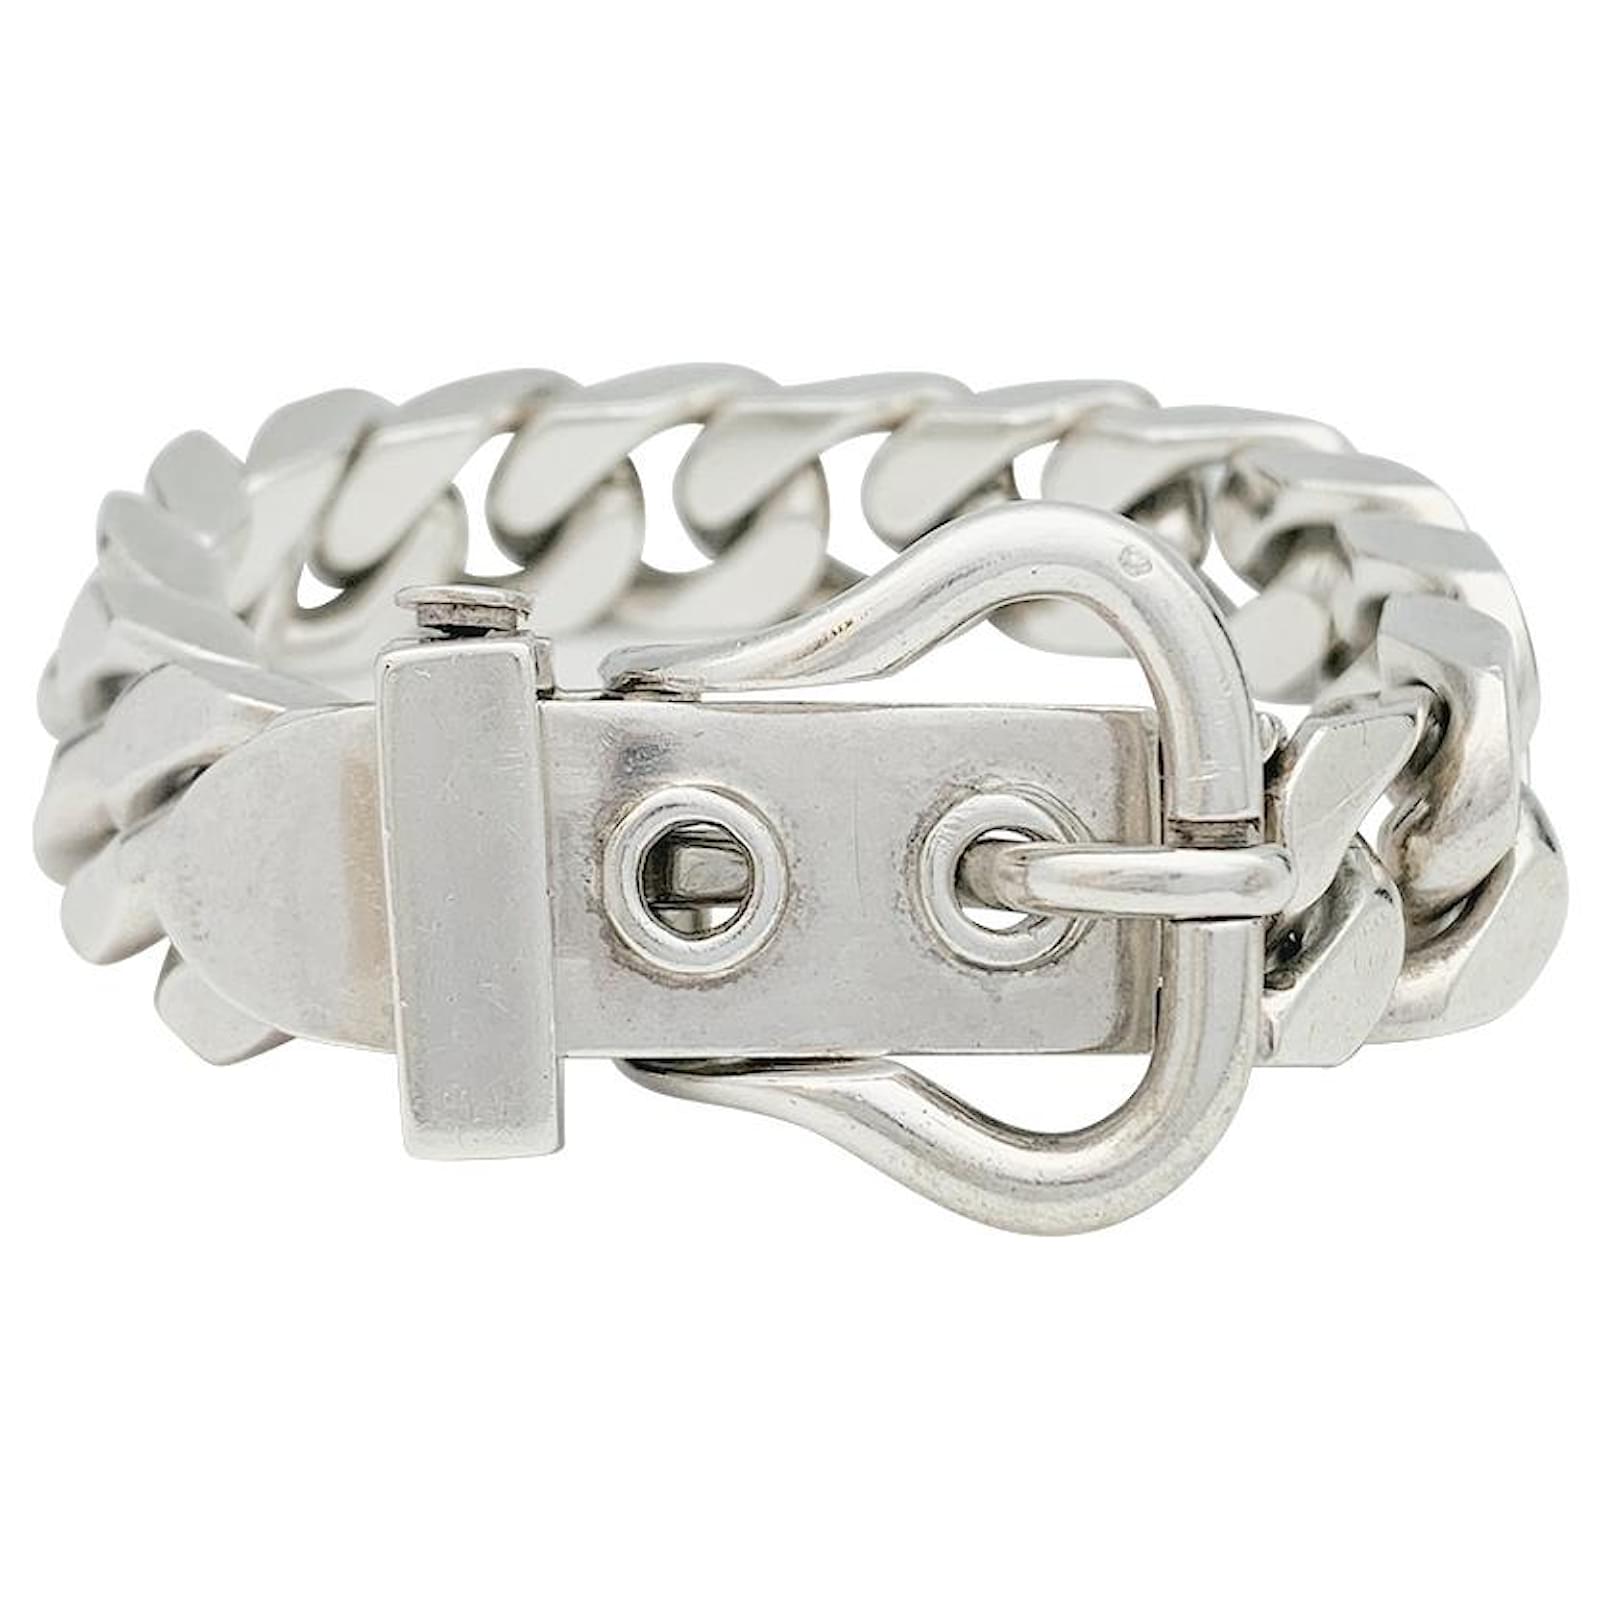 Hermès HERMES-ARMBAND MIT SELLIER-SCHNALLE IN SILBER 925